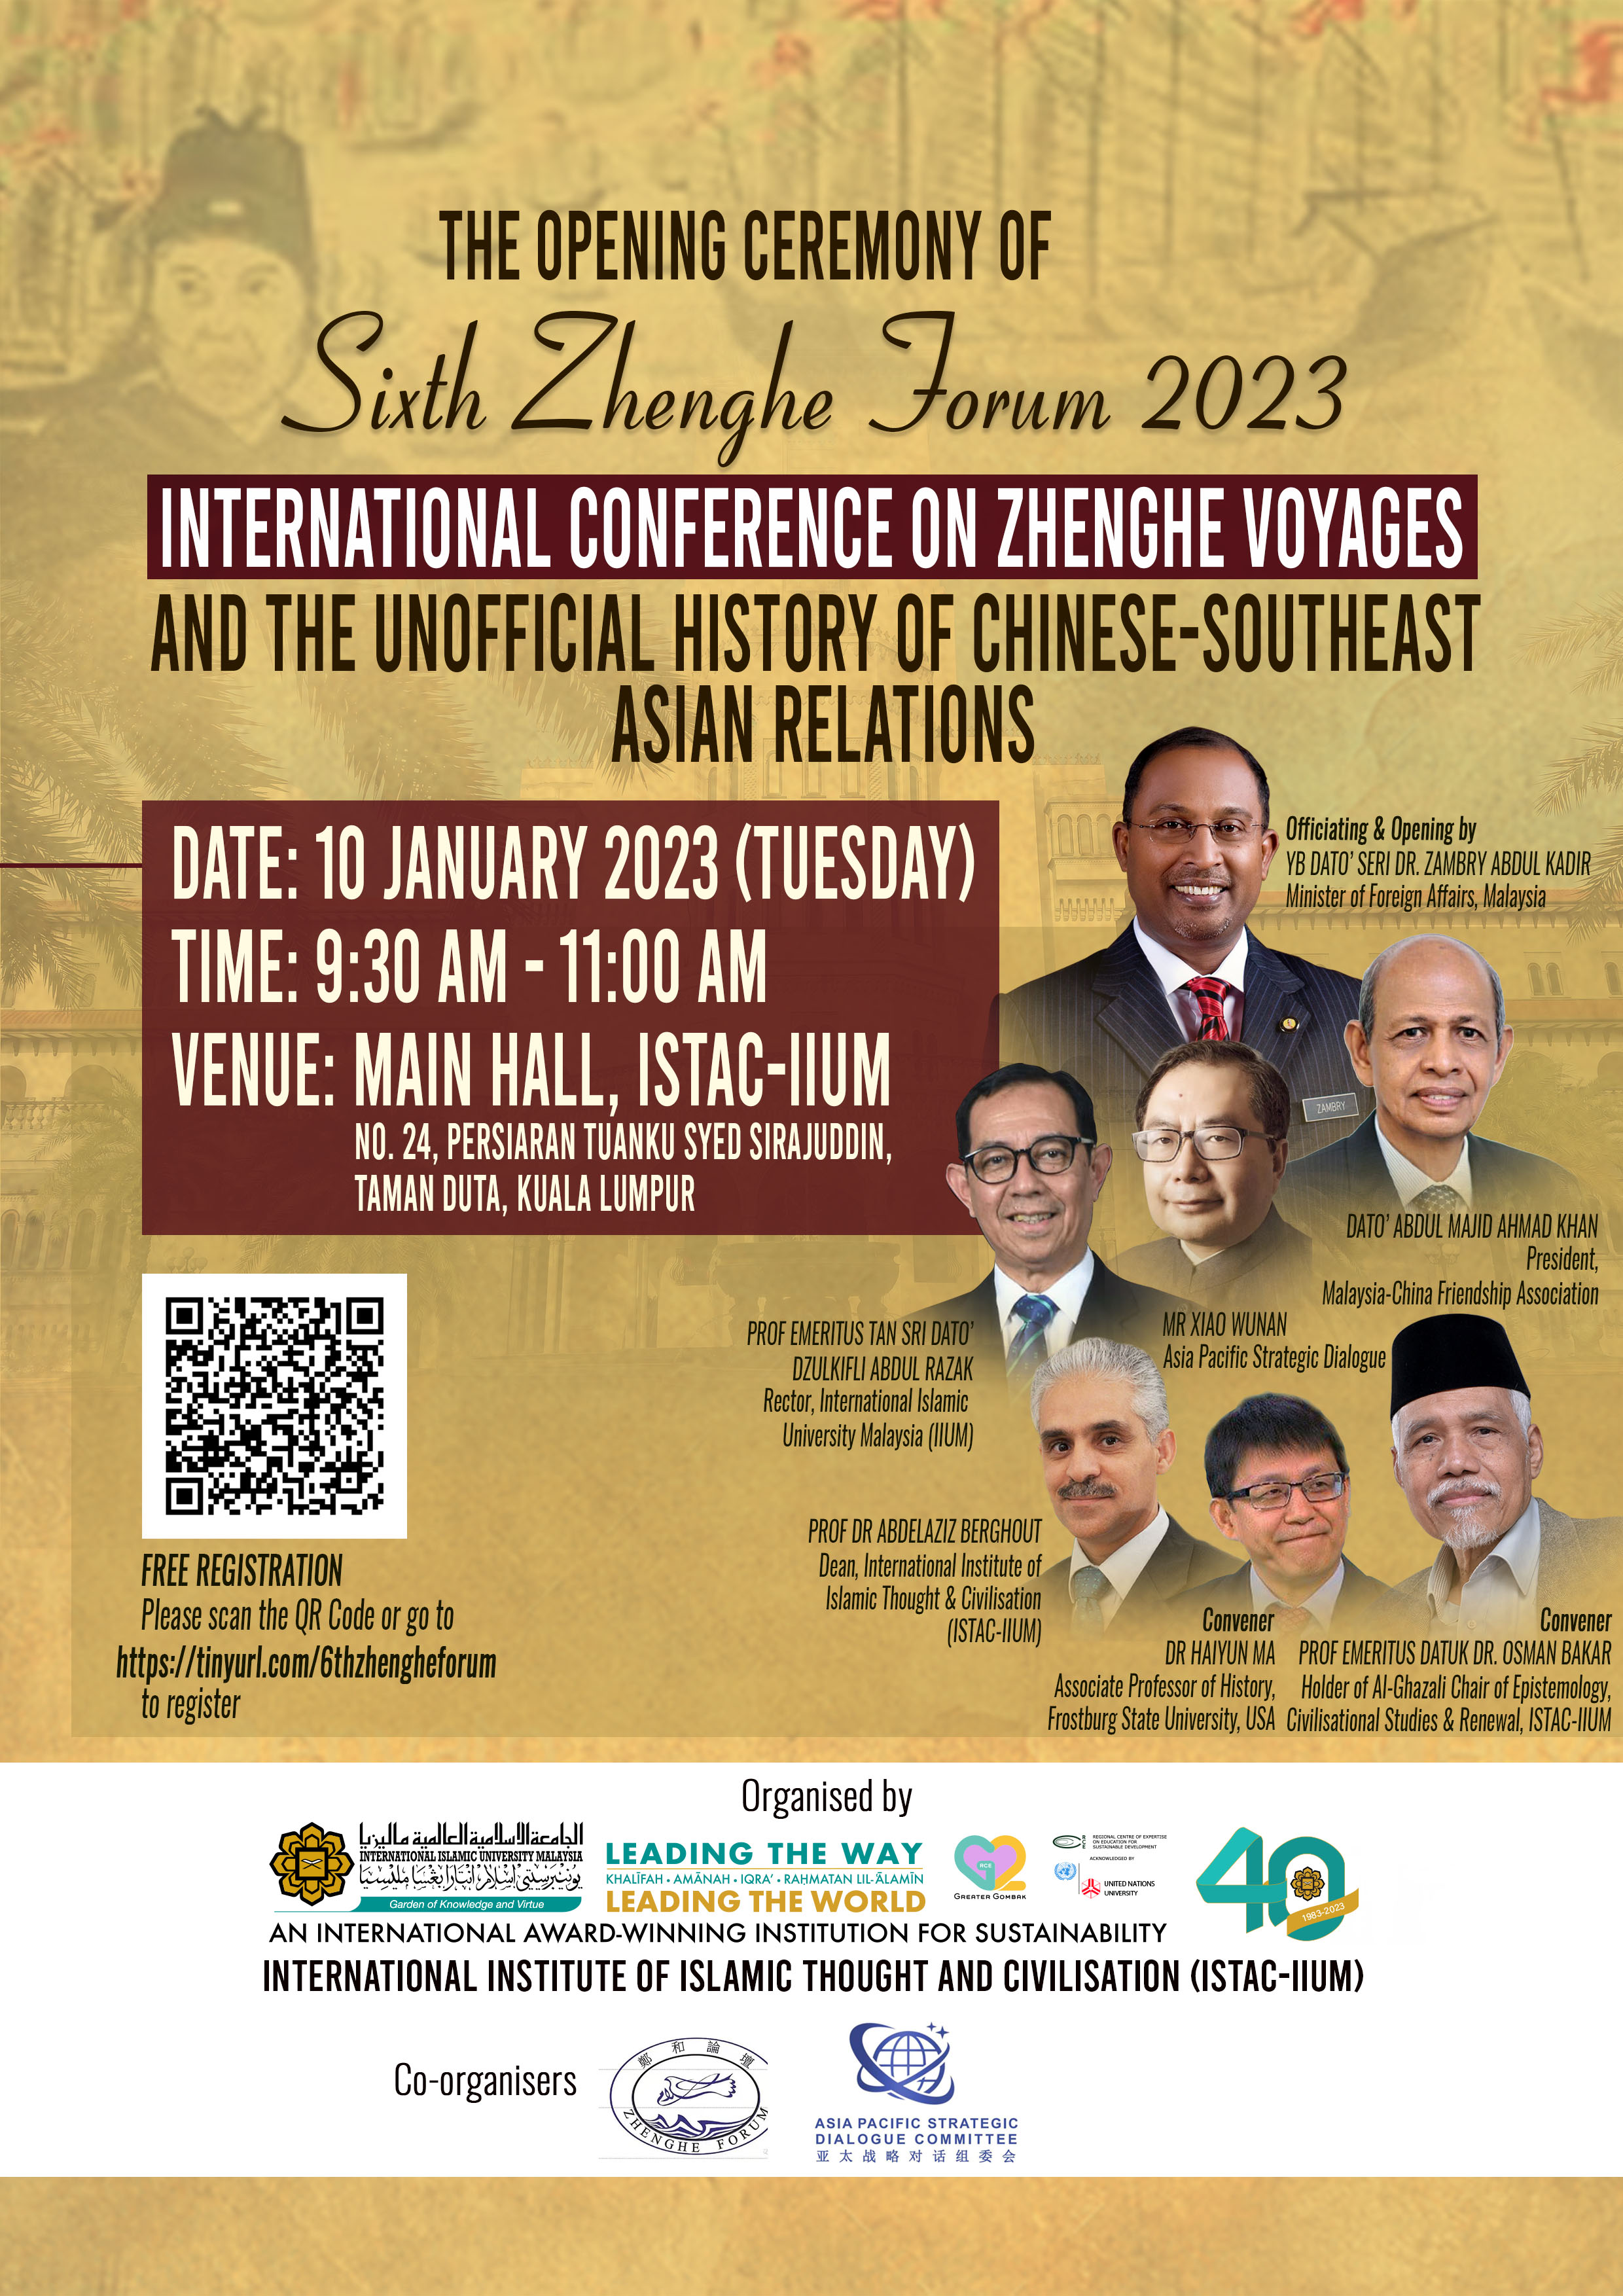 The 6th Zhenghe Conference International Conference on Zhenghe  Voyages and the Unofficial History of Chinese-Southeast Asian Relations